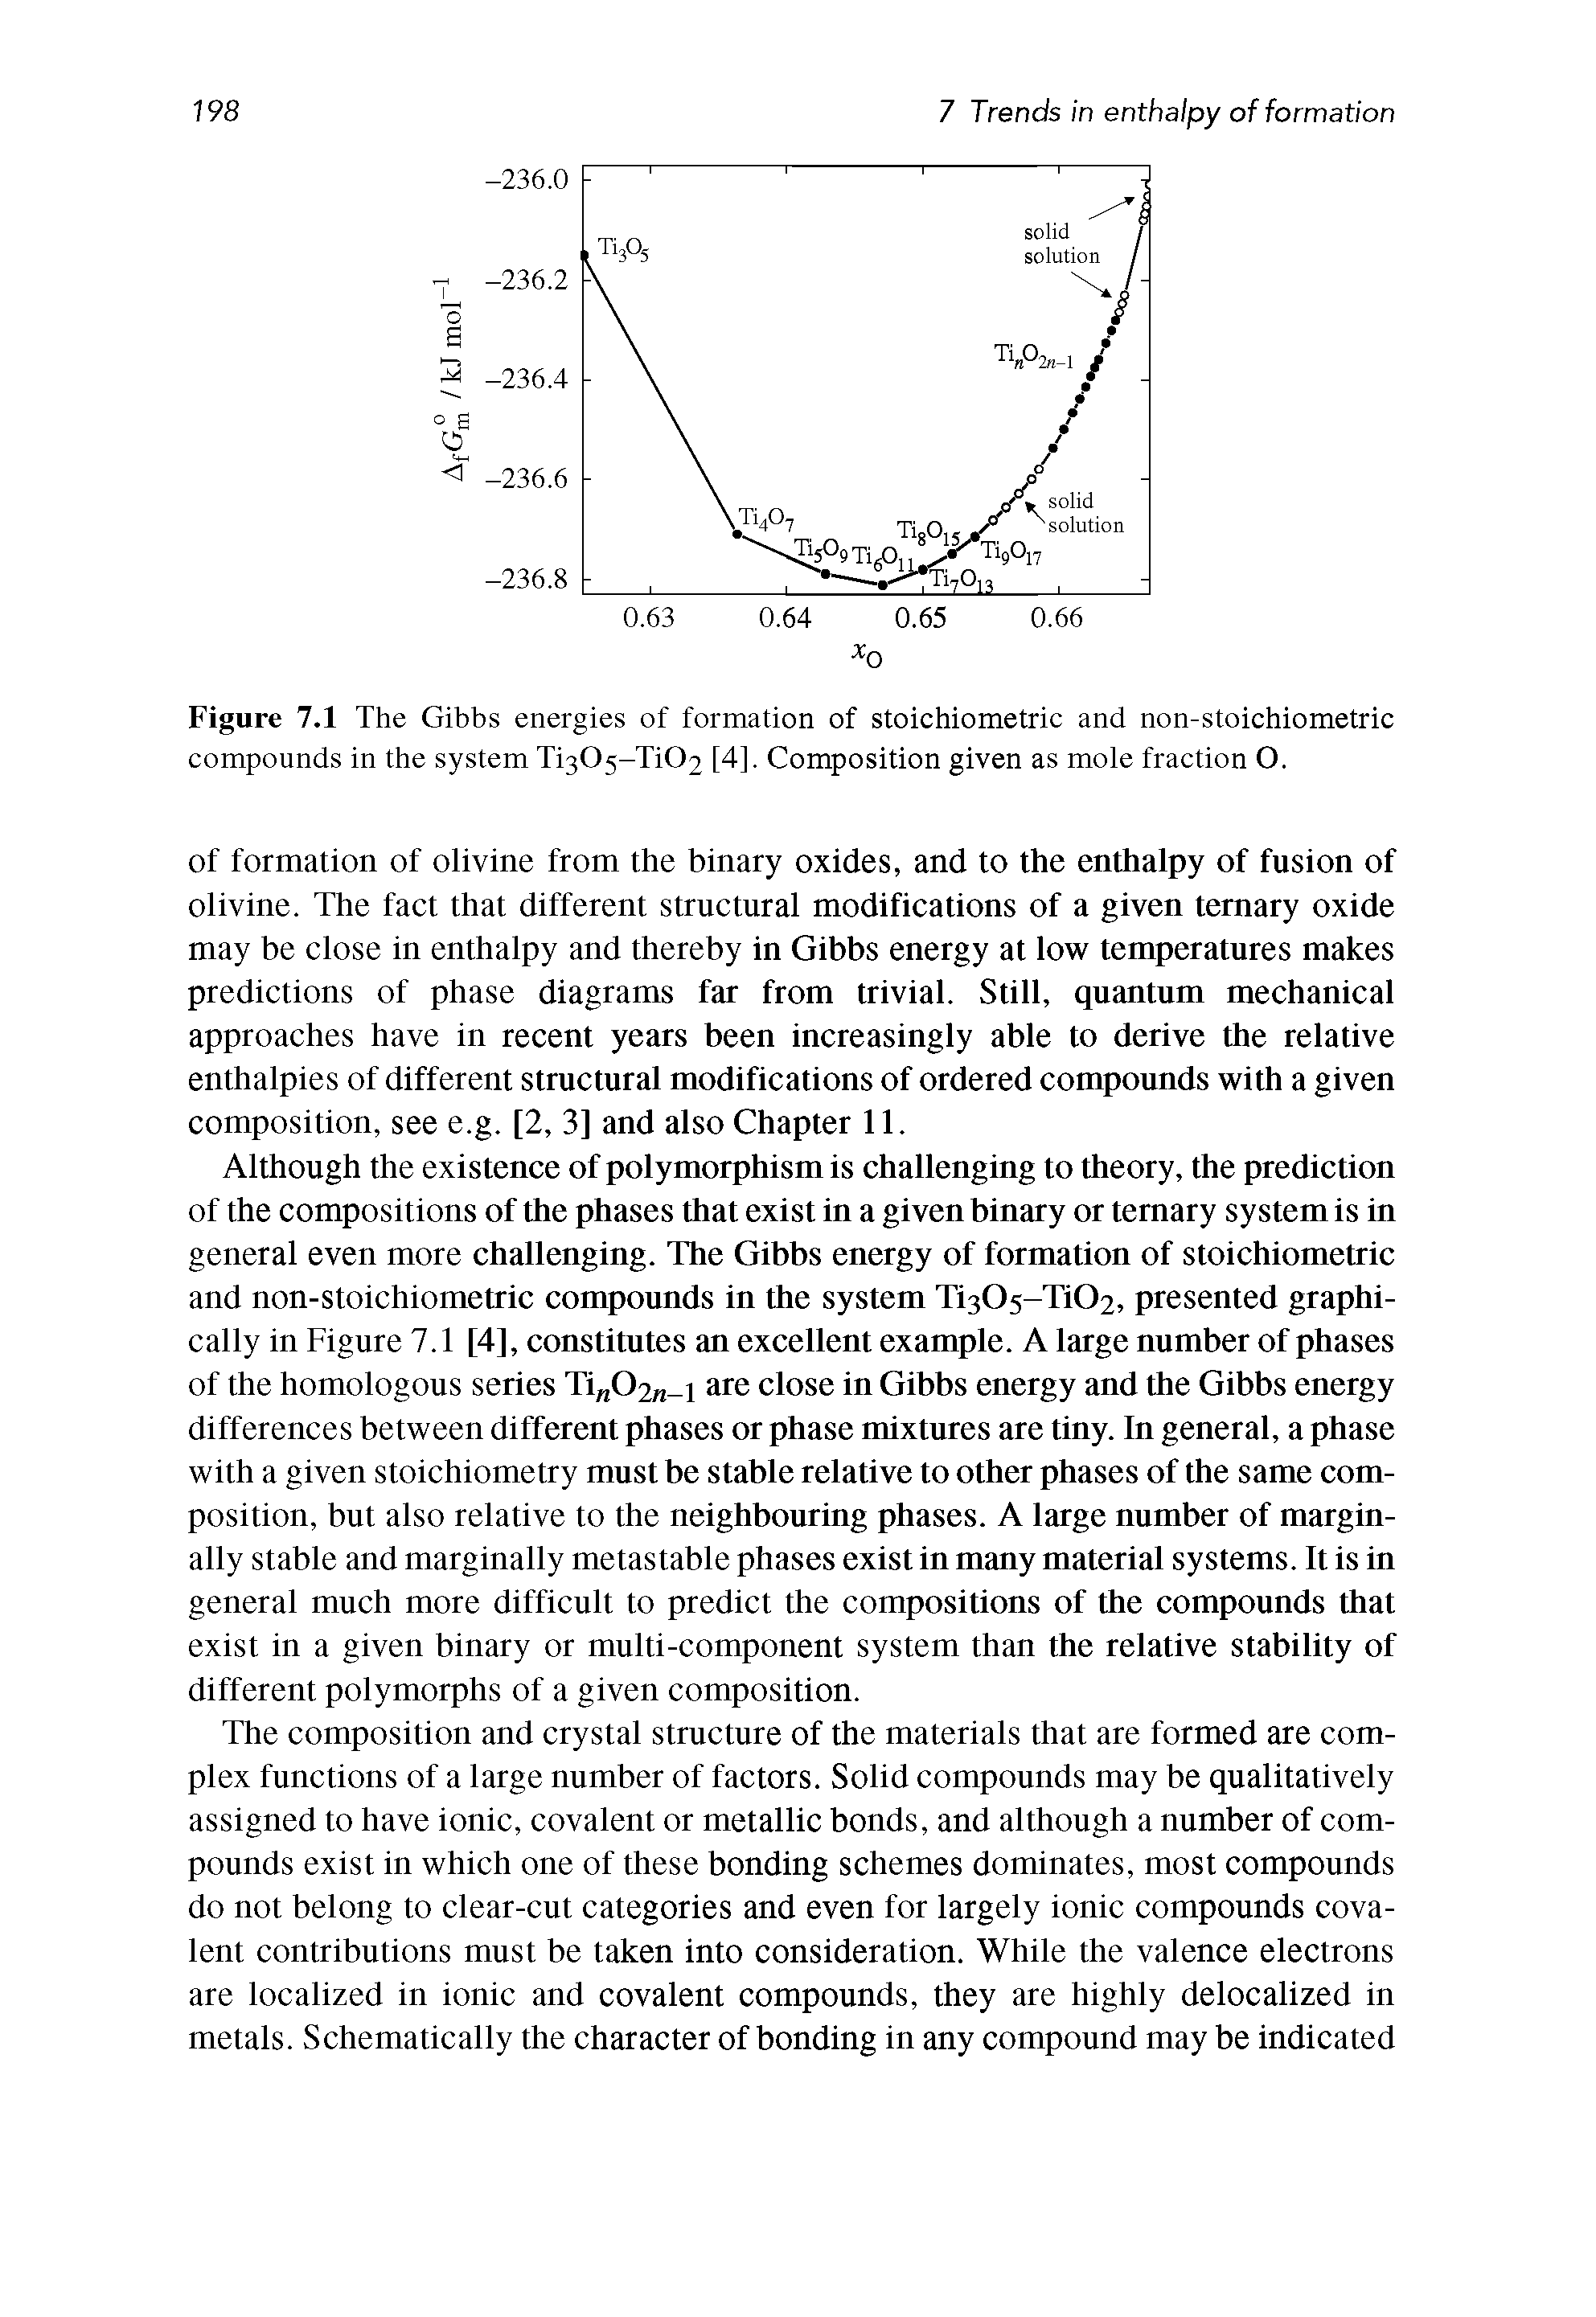 Figure 7.1 The Gibbs energies of formation of stoichiometric and non-stoichiometric compounds in the system Ti305-Ti02 [4]. Composition given as mole fraction O.